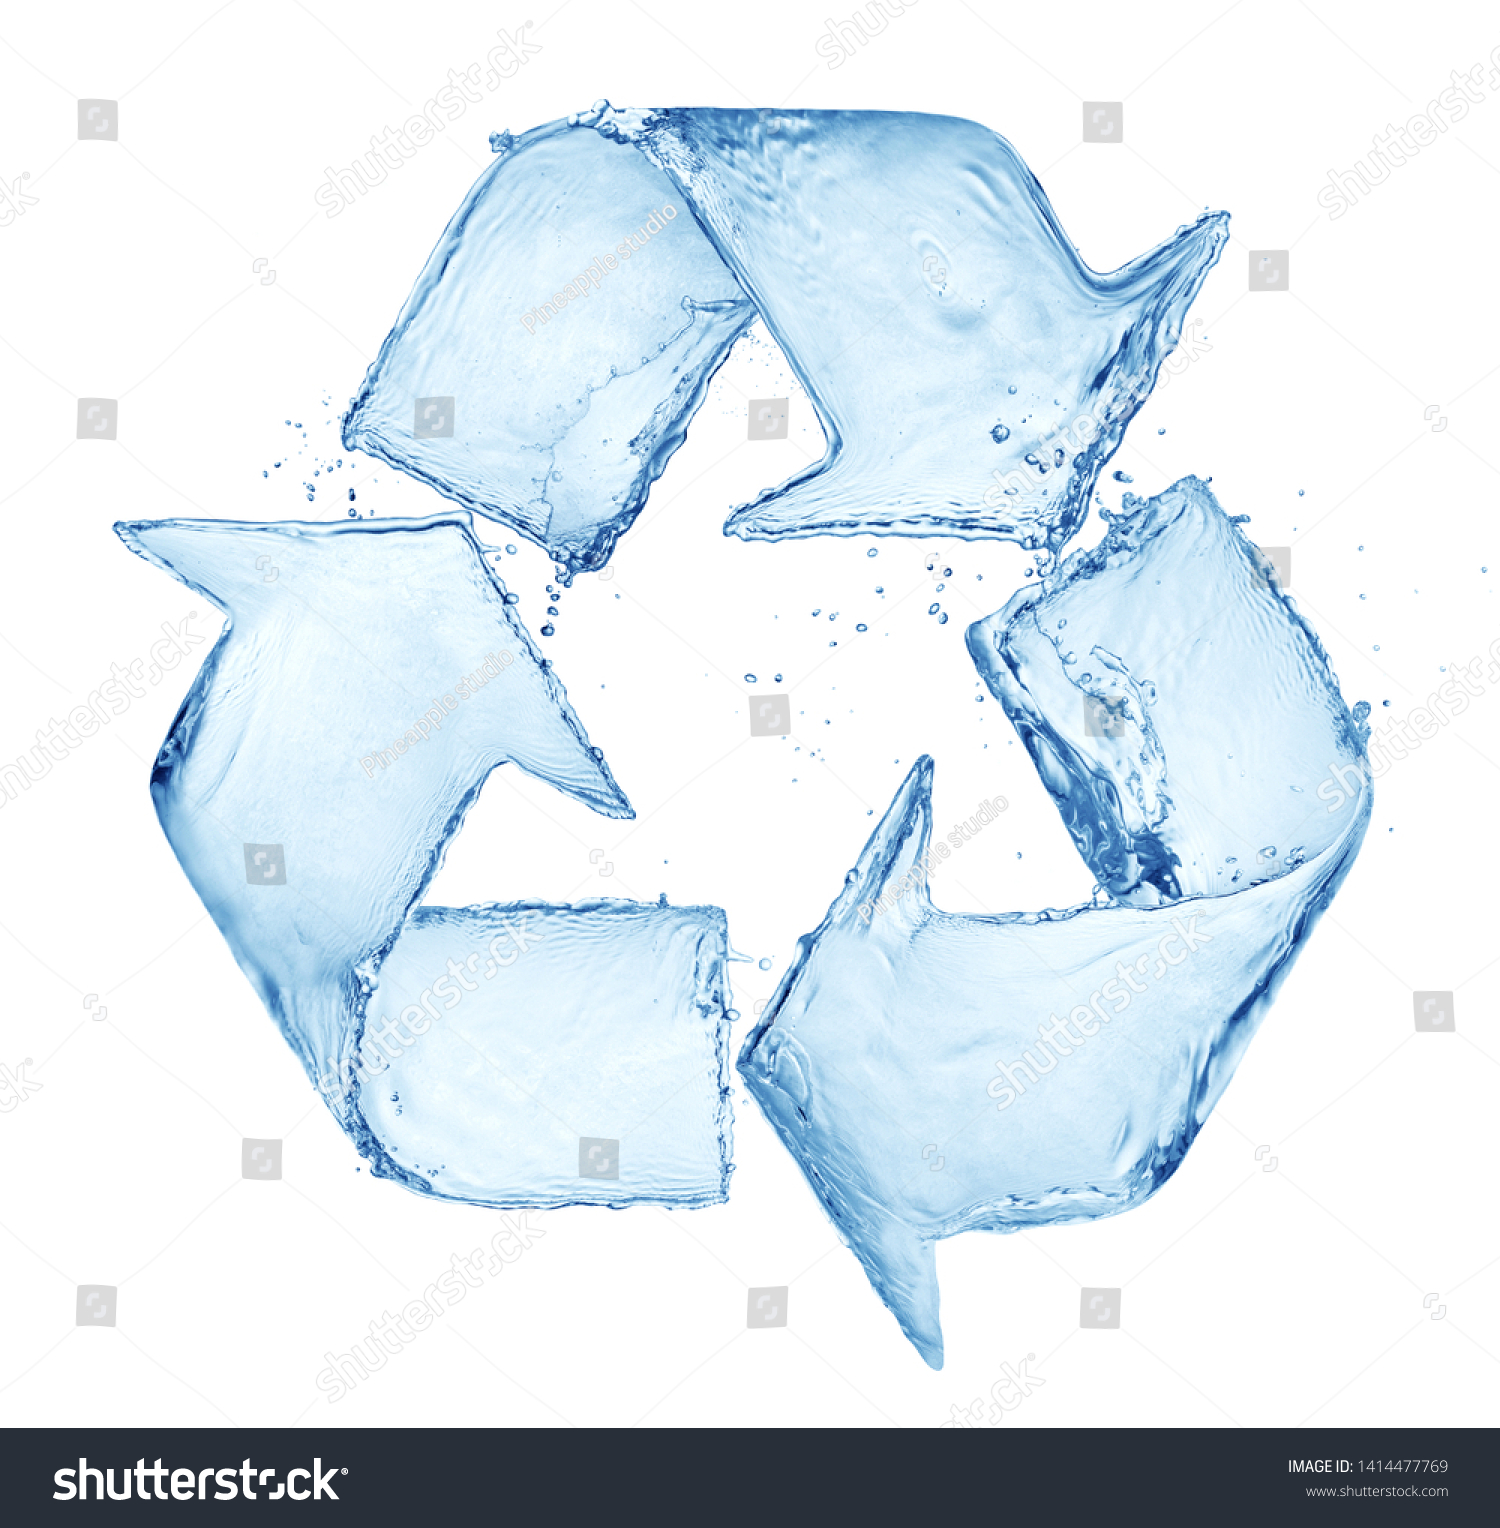 recycling mark made of pure blue water splash isolated on white background #1414477769